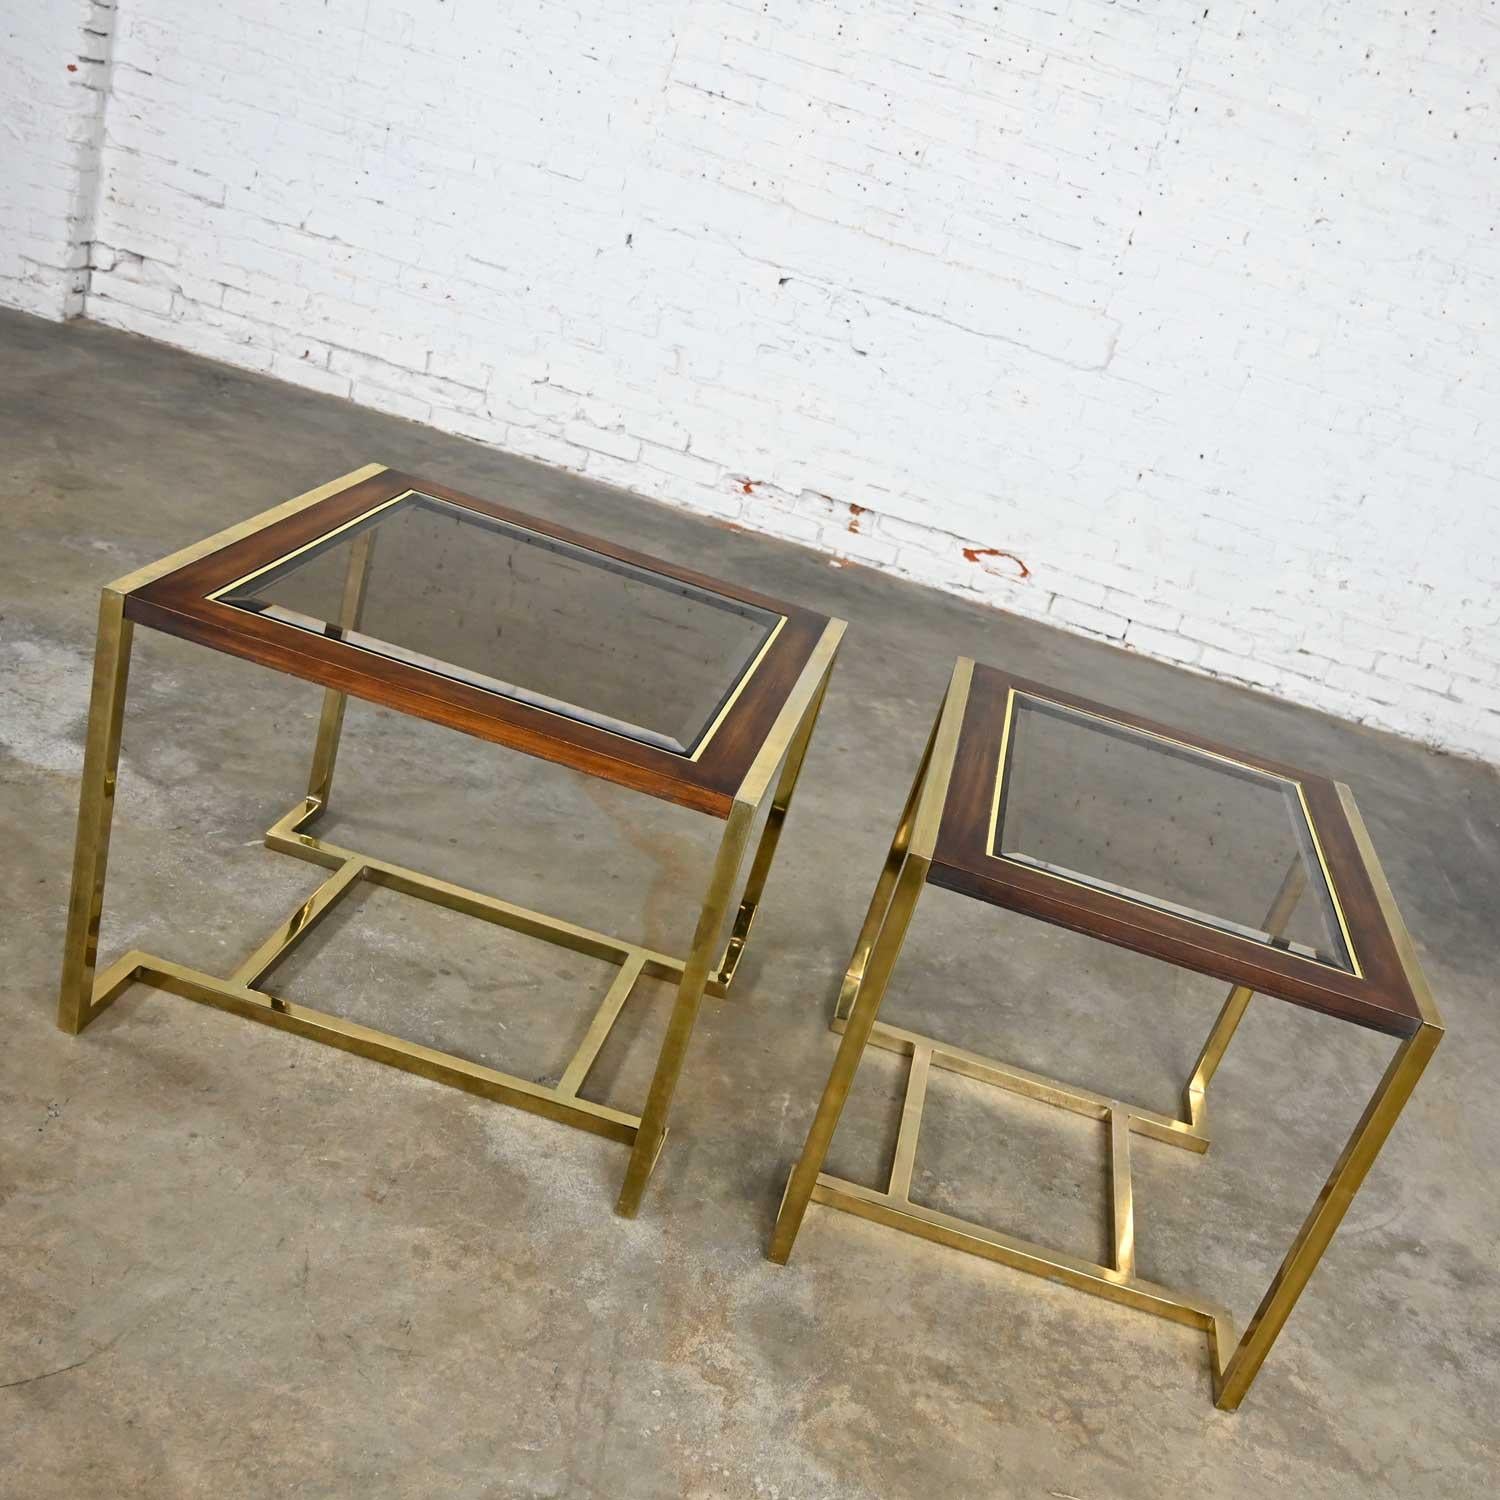 2 Brass Plated Wood & Glass End Tables by Thomasville Furn Style Milo Baughman In Good Condition For Sale In Topeka, KS